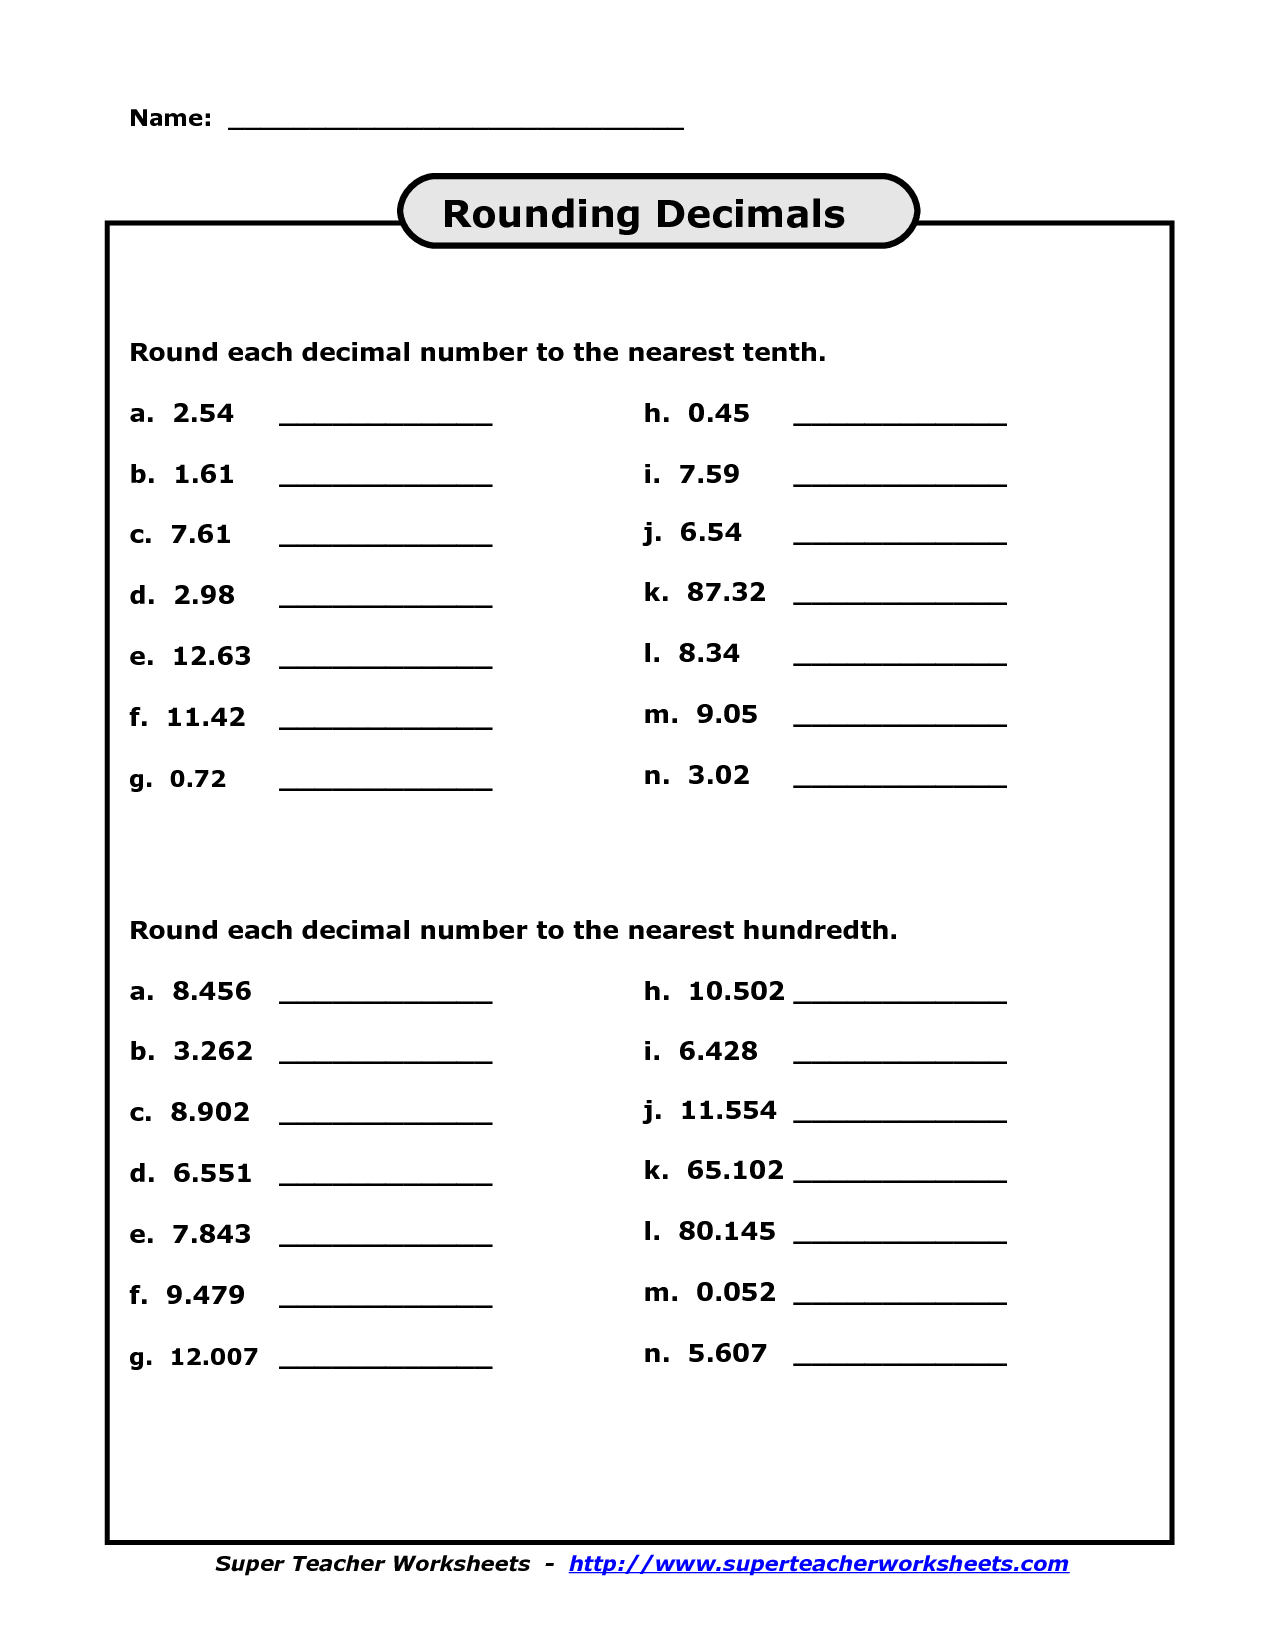 9-best-images-of-rounding-decimal-numbers-worksheets-rounding-number-patterns-and-sequence-4th